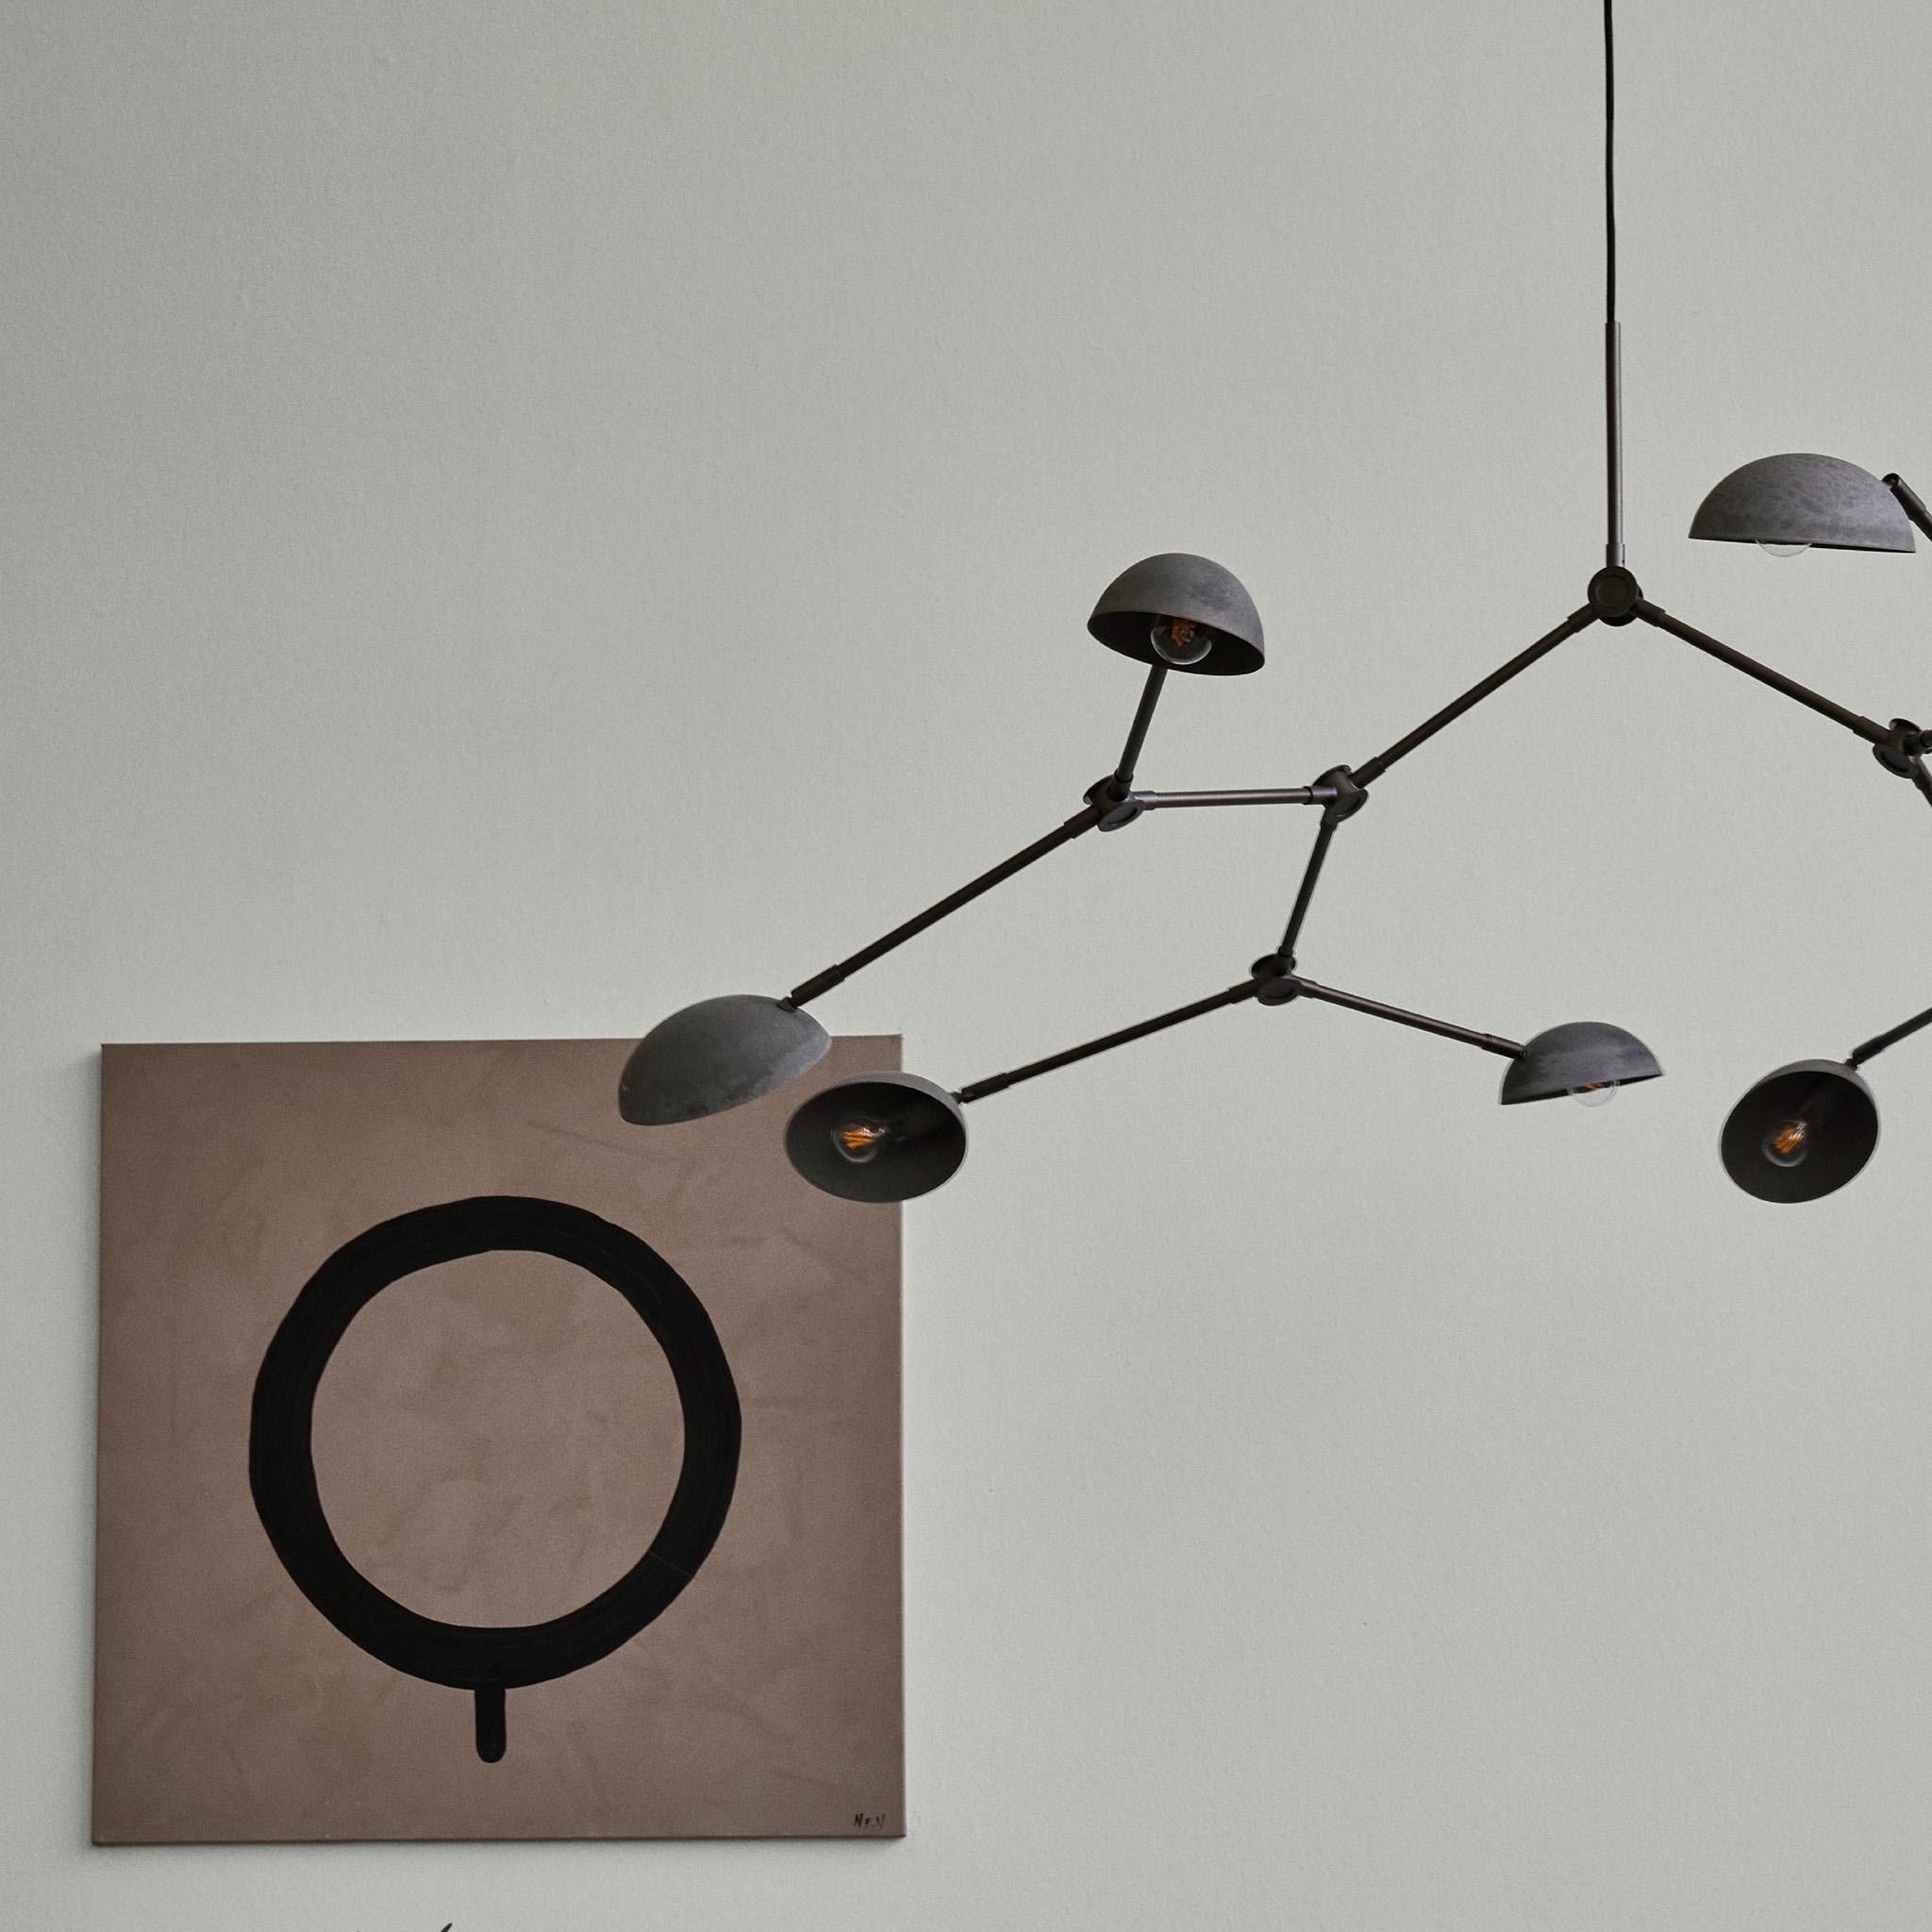 Drop chandelier bronze by 101 Copenhagen
Designed by Kristian Sofus Hansen & Tommy Hyldahl.
Dimensions: L155 x W91 x H21 cm
Materials: bronze; lampshade & ceiling cup:100% Iron, with plated Bronze finish
Pipes & attachment parts is made of 100%